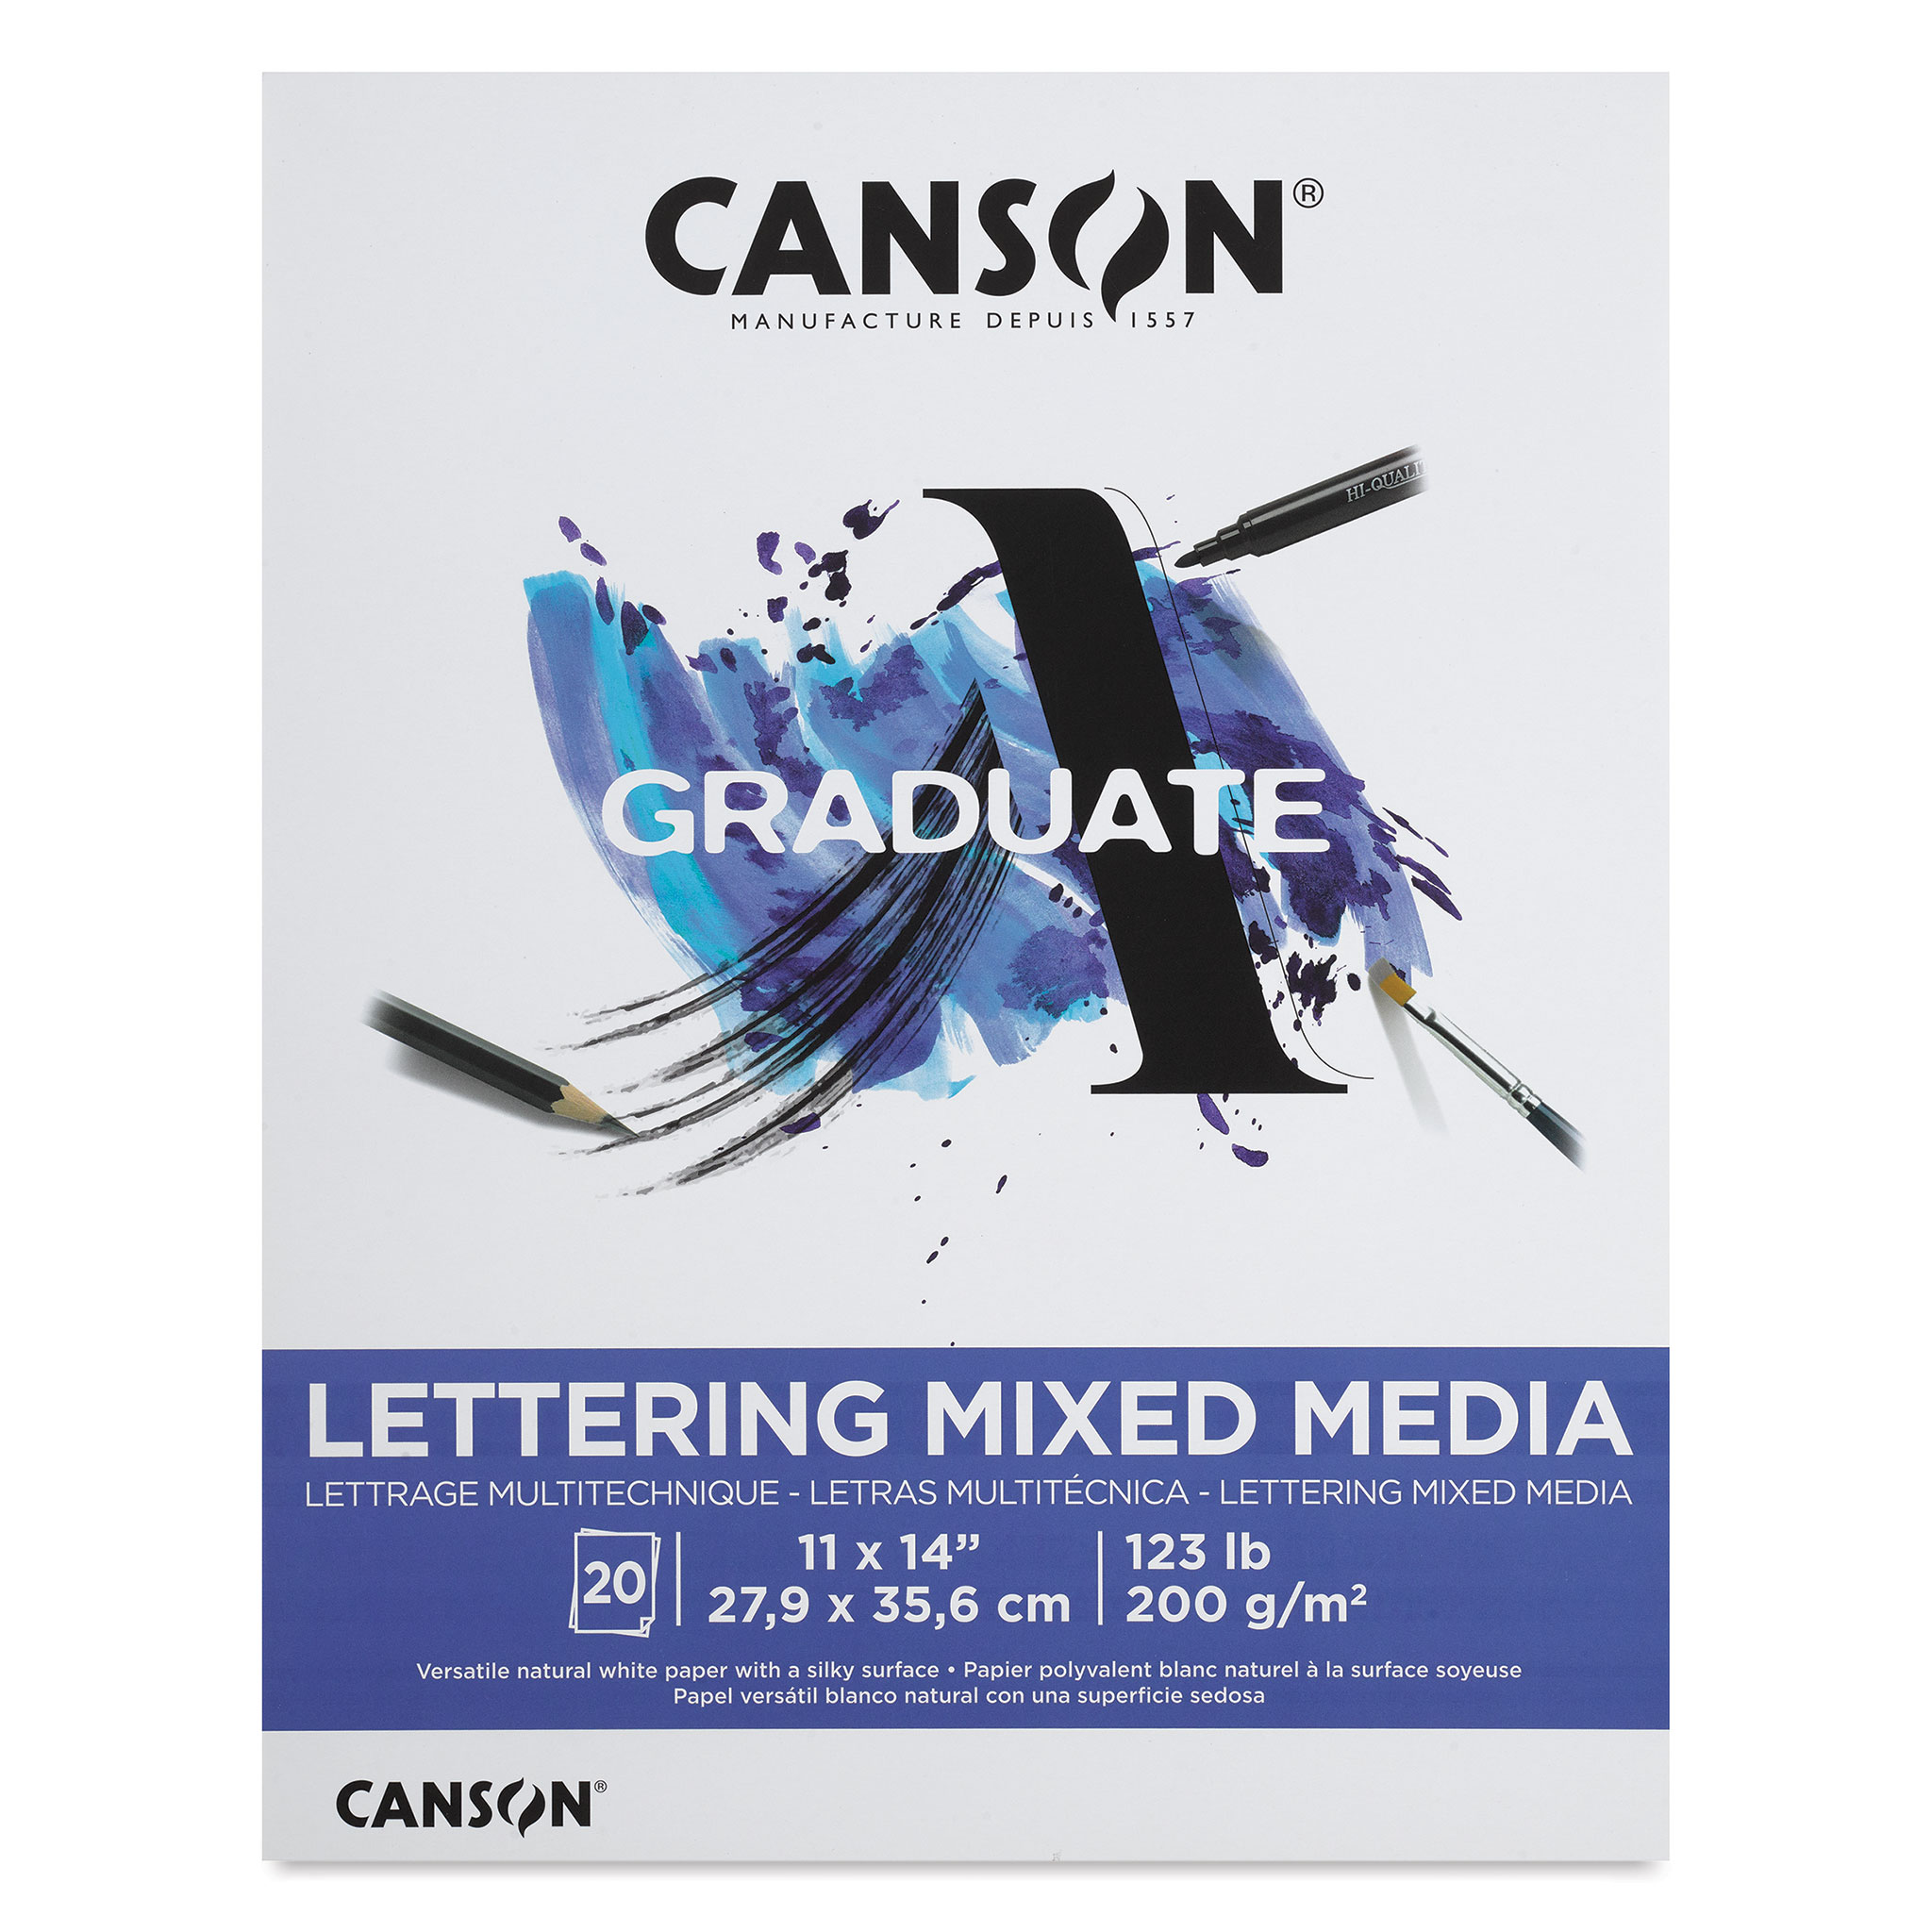 Canson — Posts — The Studio Manager